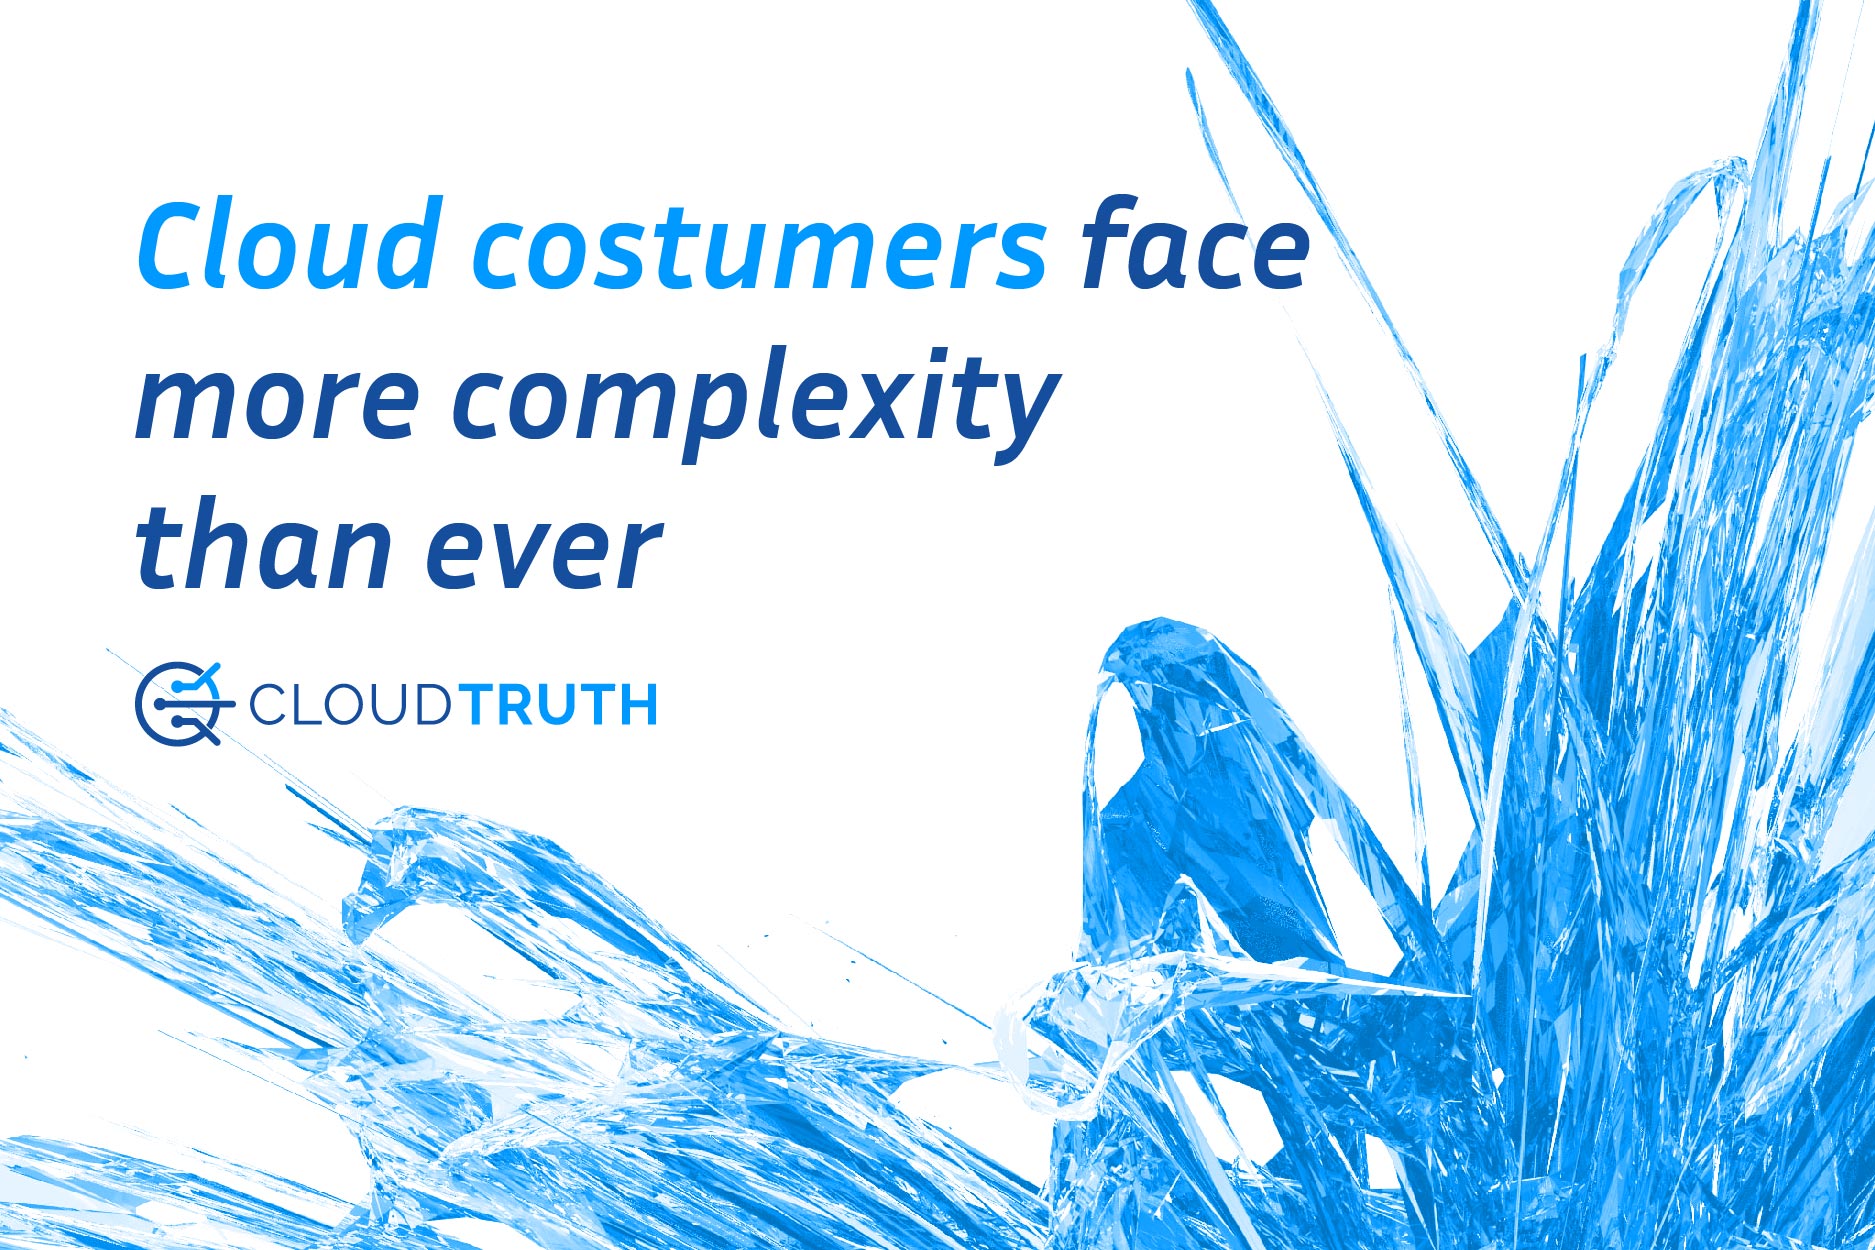 Cloud Customers Face More Complexity Than Ever